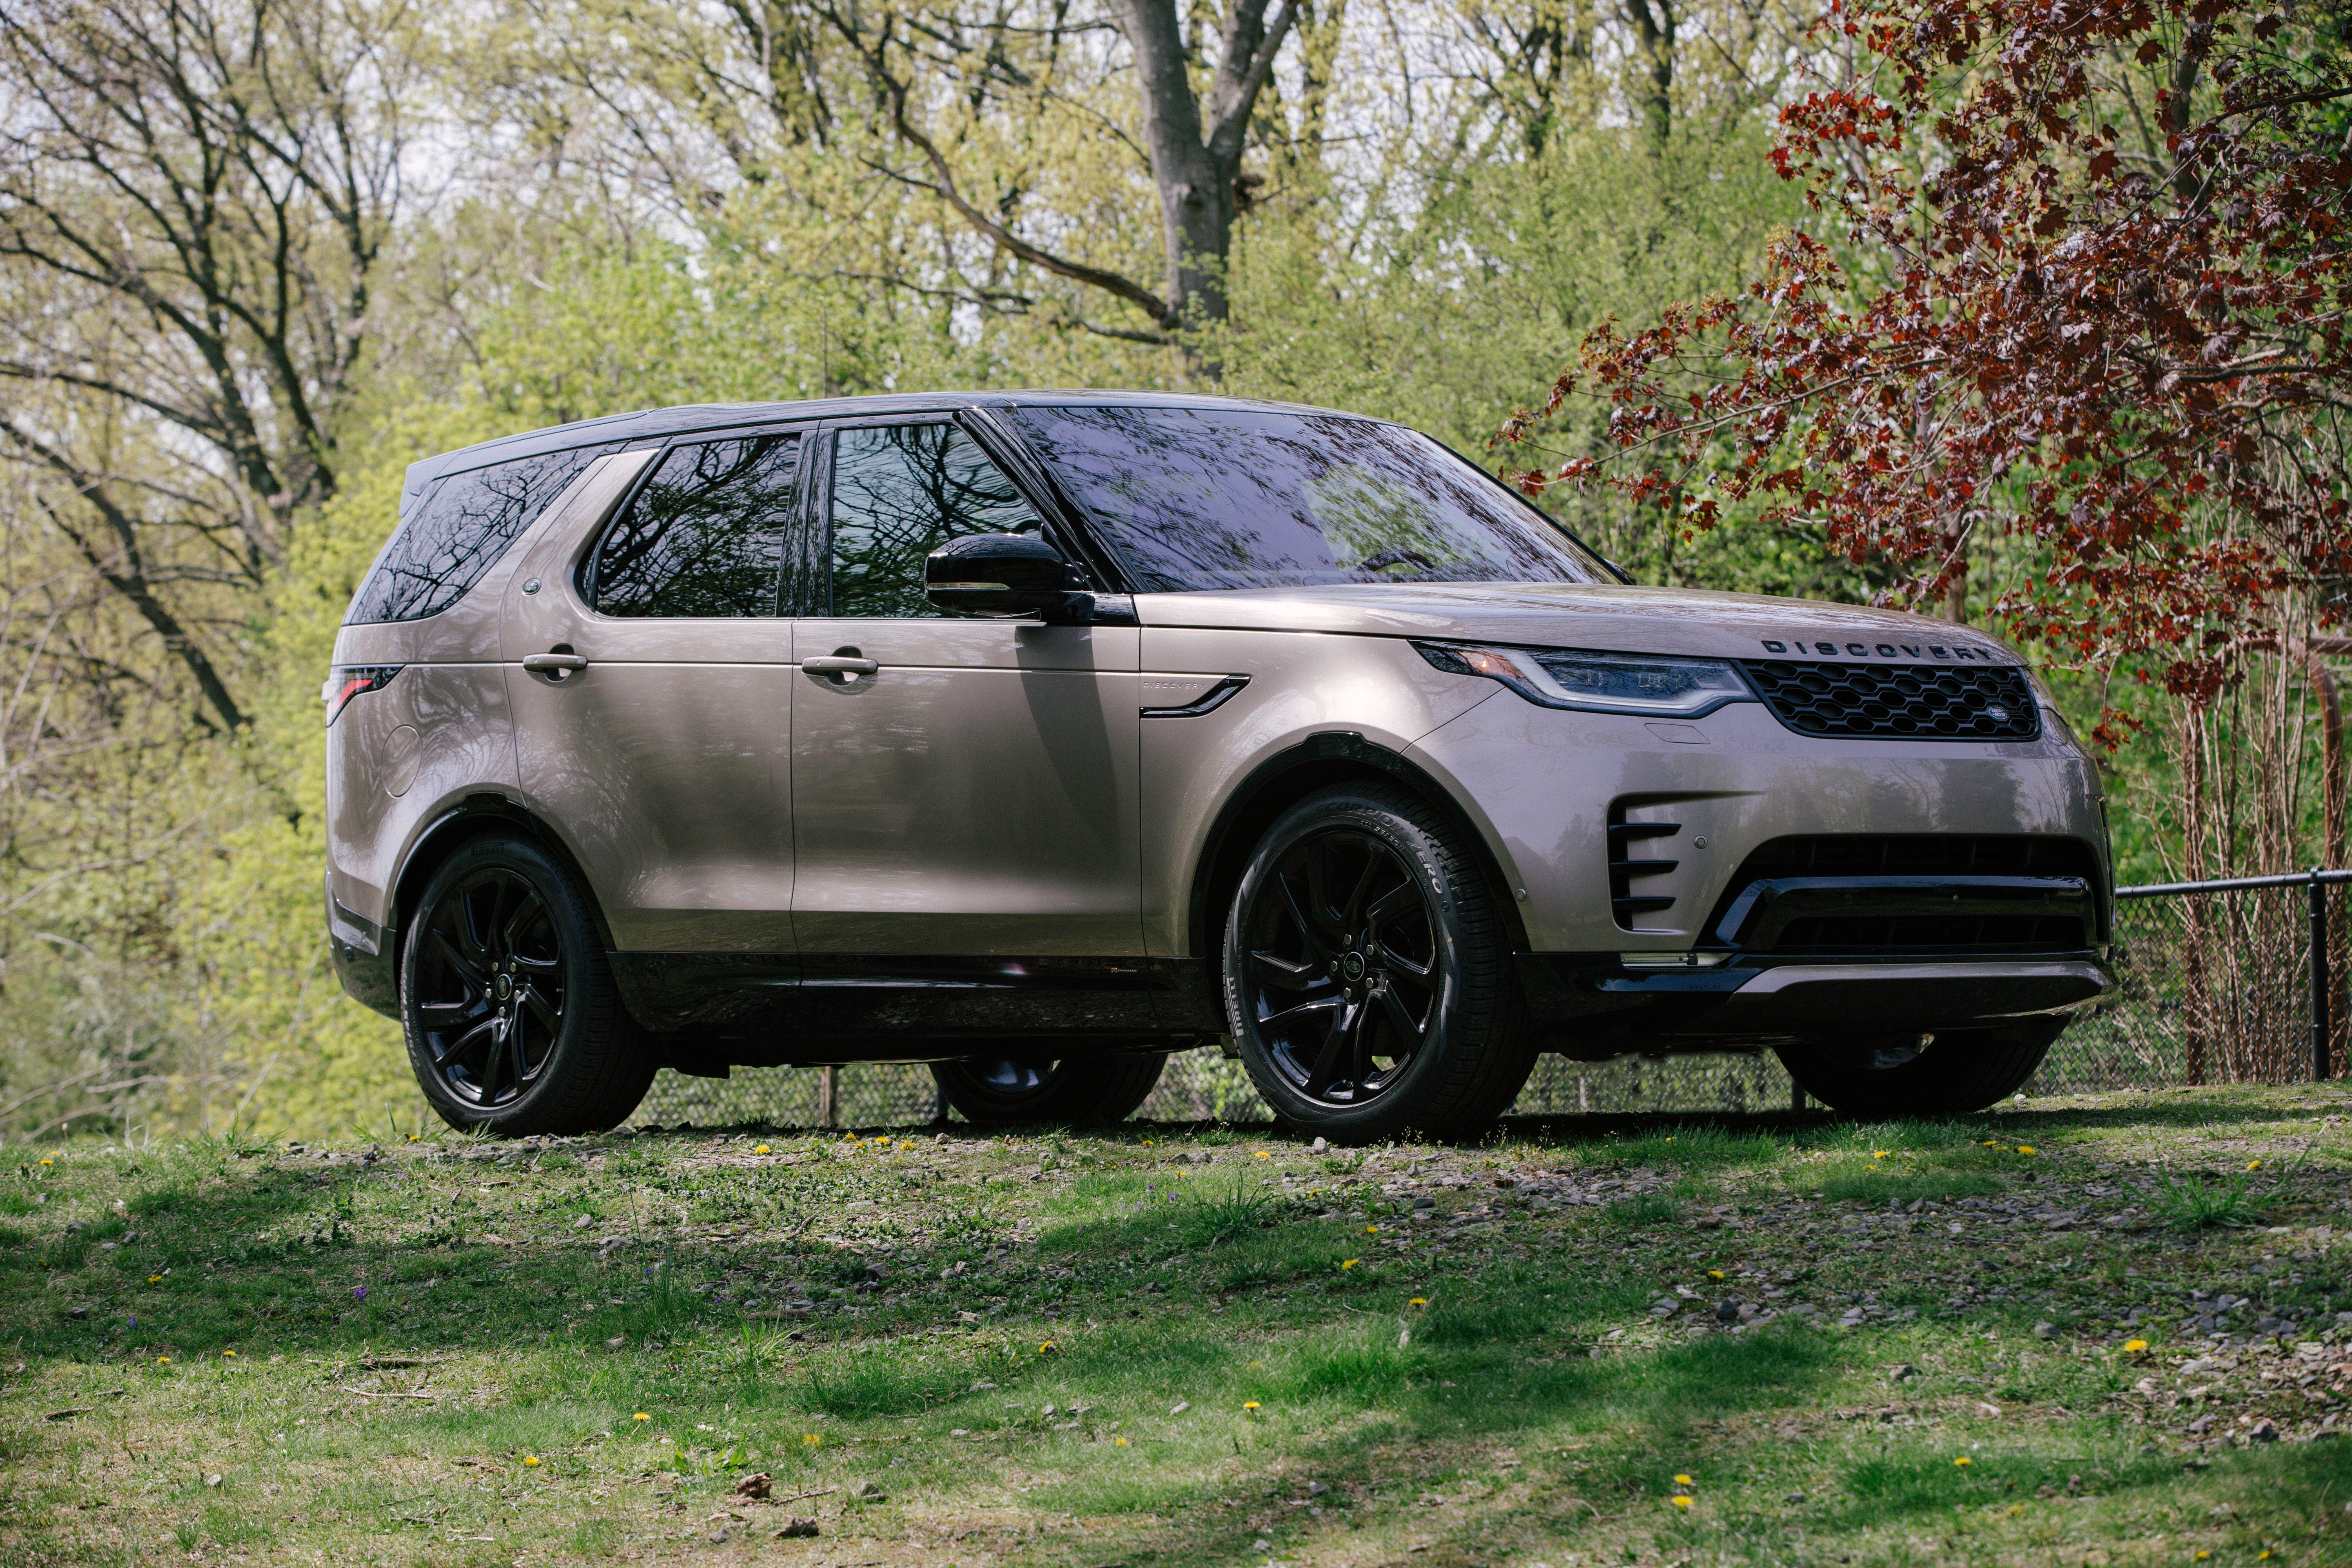 2021 Land Rover Discovery Review: No matter what you need, Land Rover has  an SUV for you.